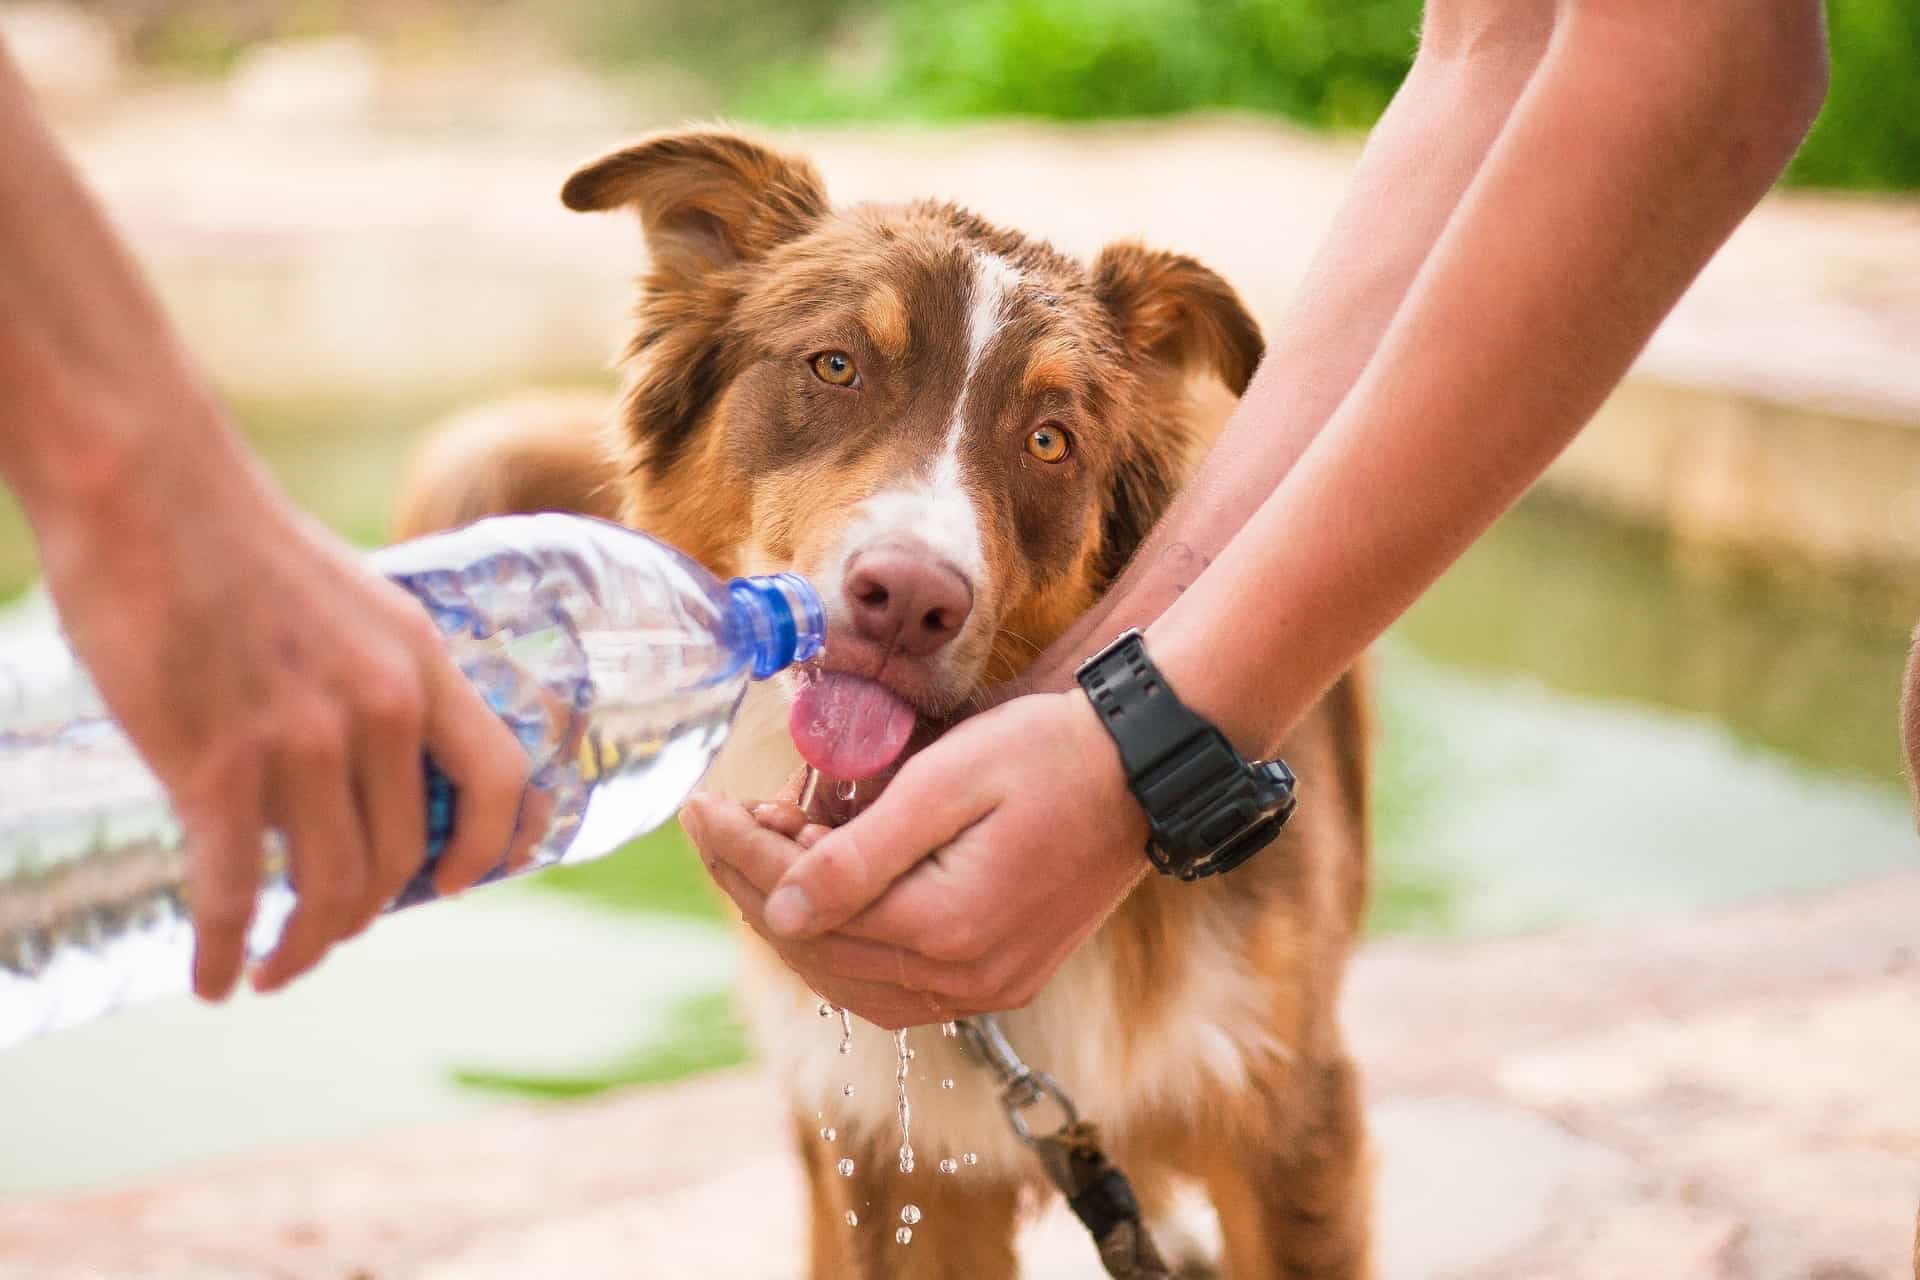 Keep your pets cool this summer